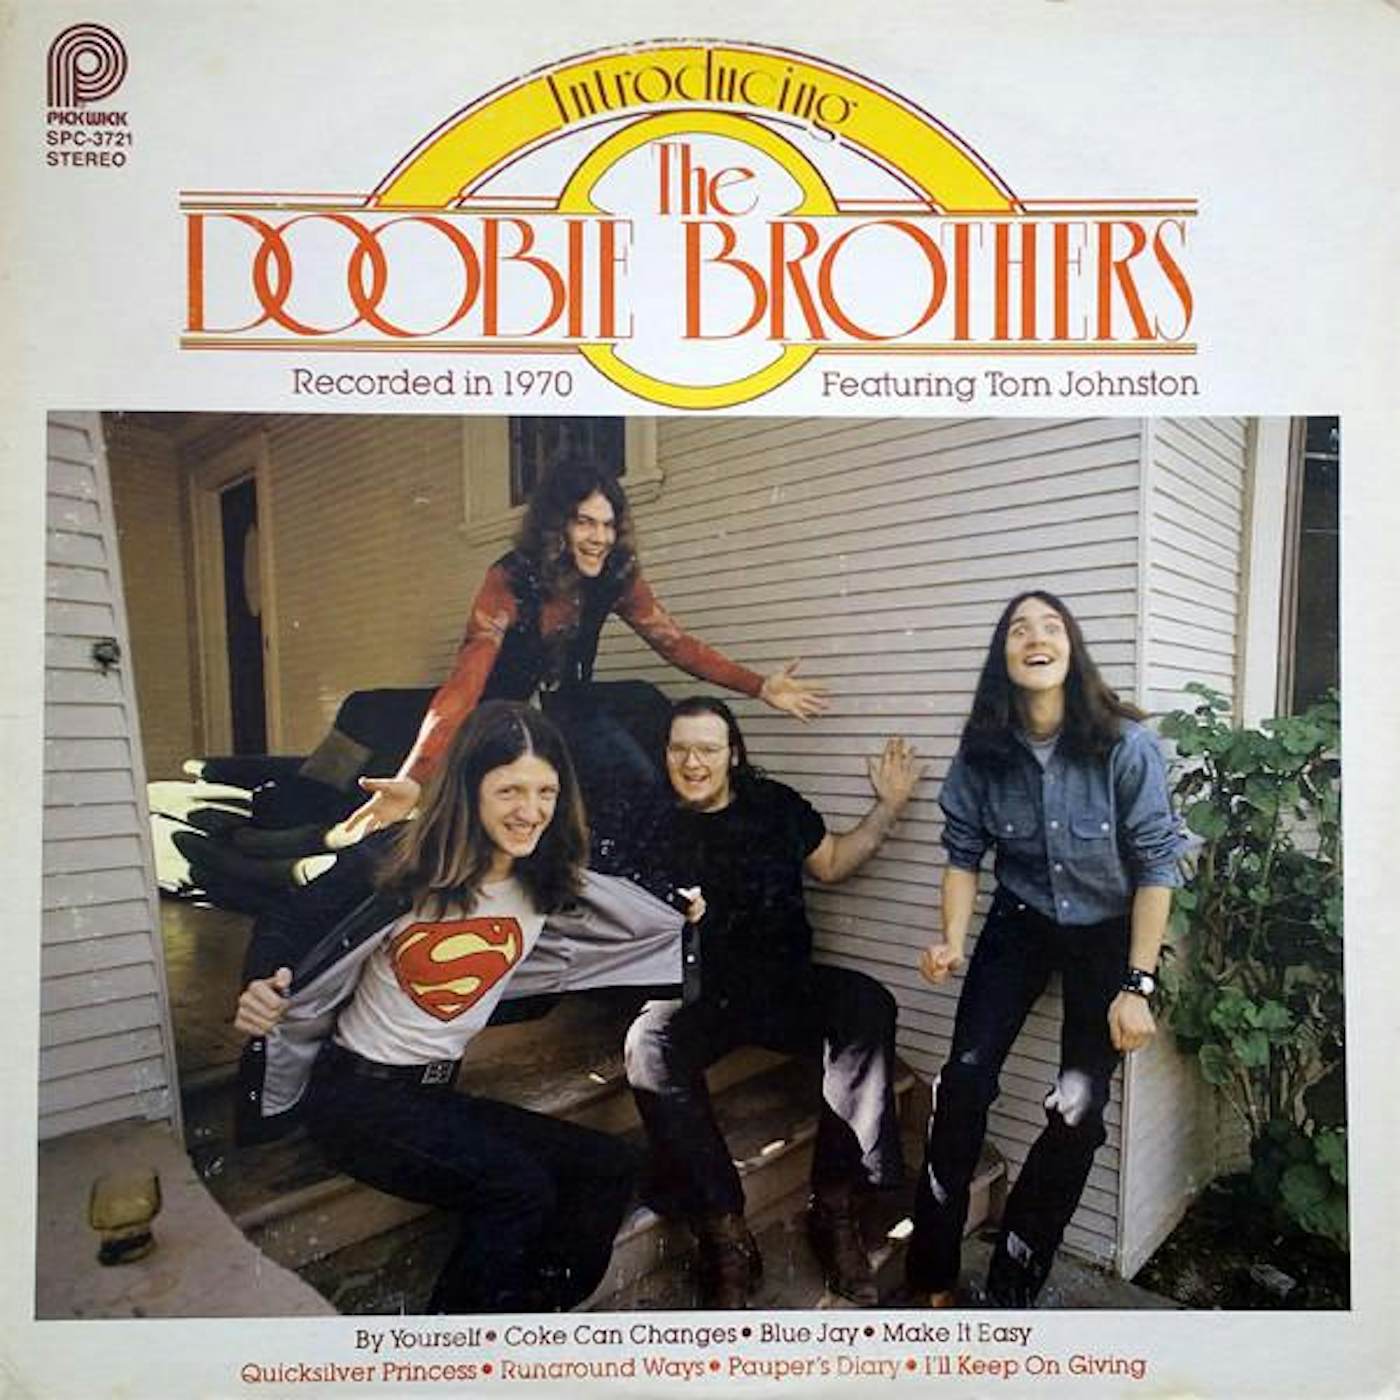 INTRODUCING THE DOOBIE BROTHERS CD